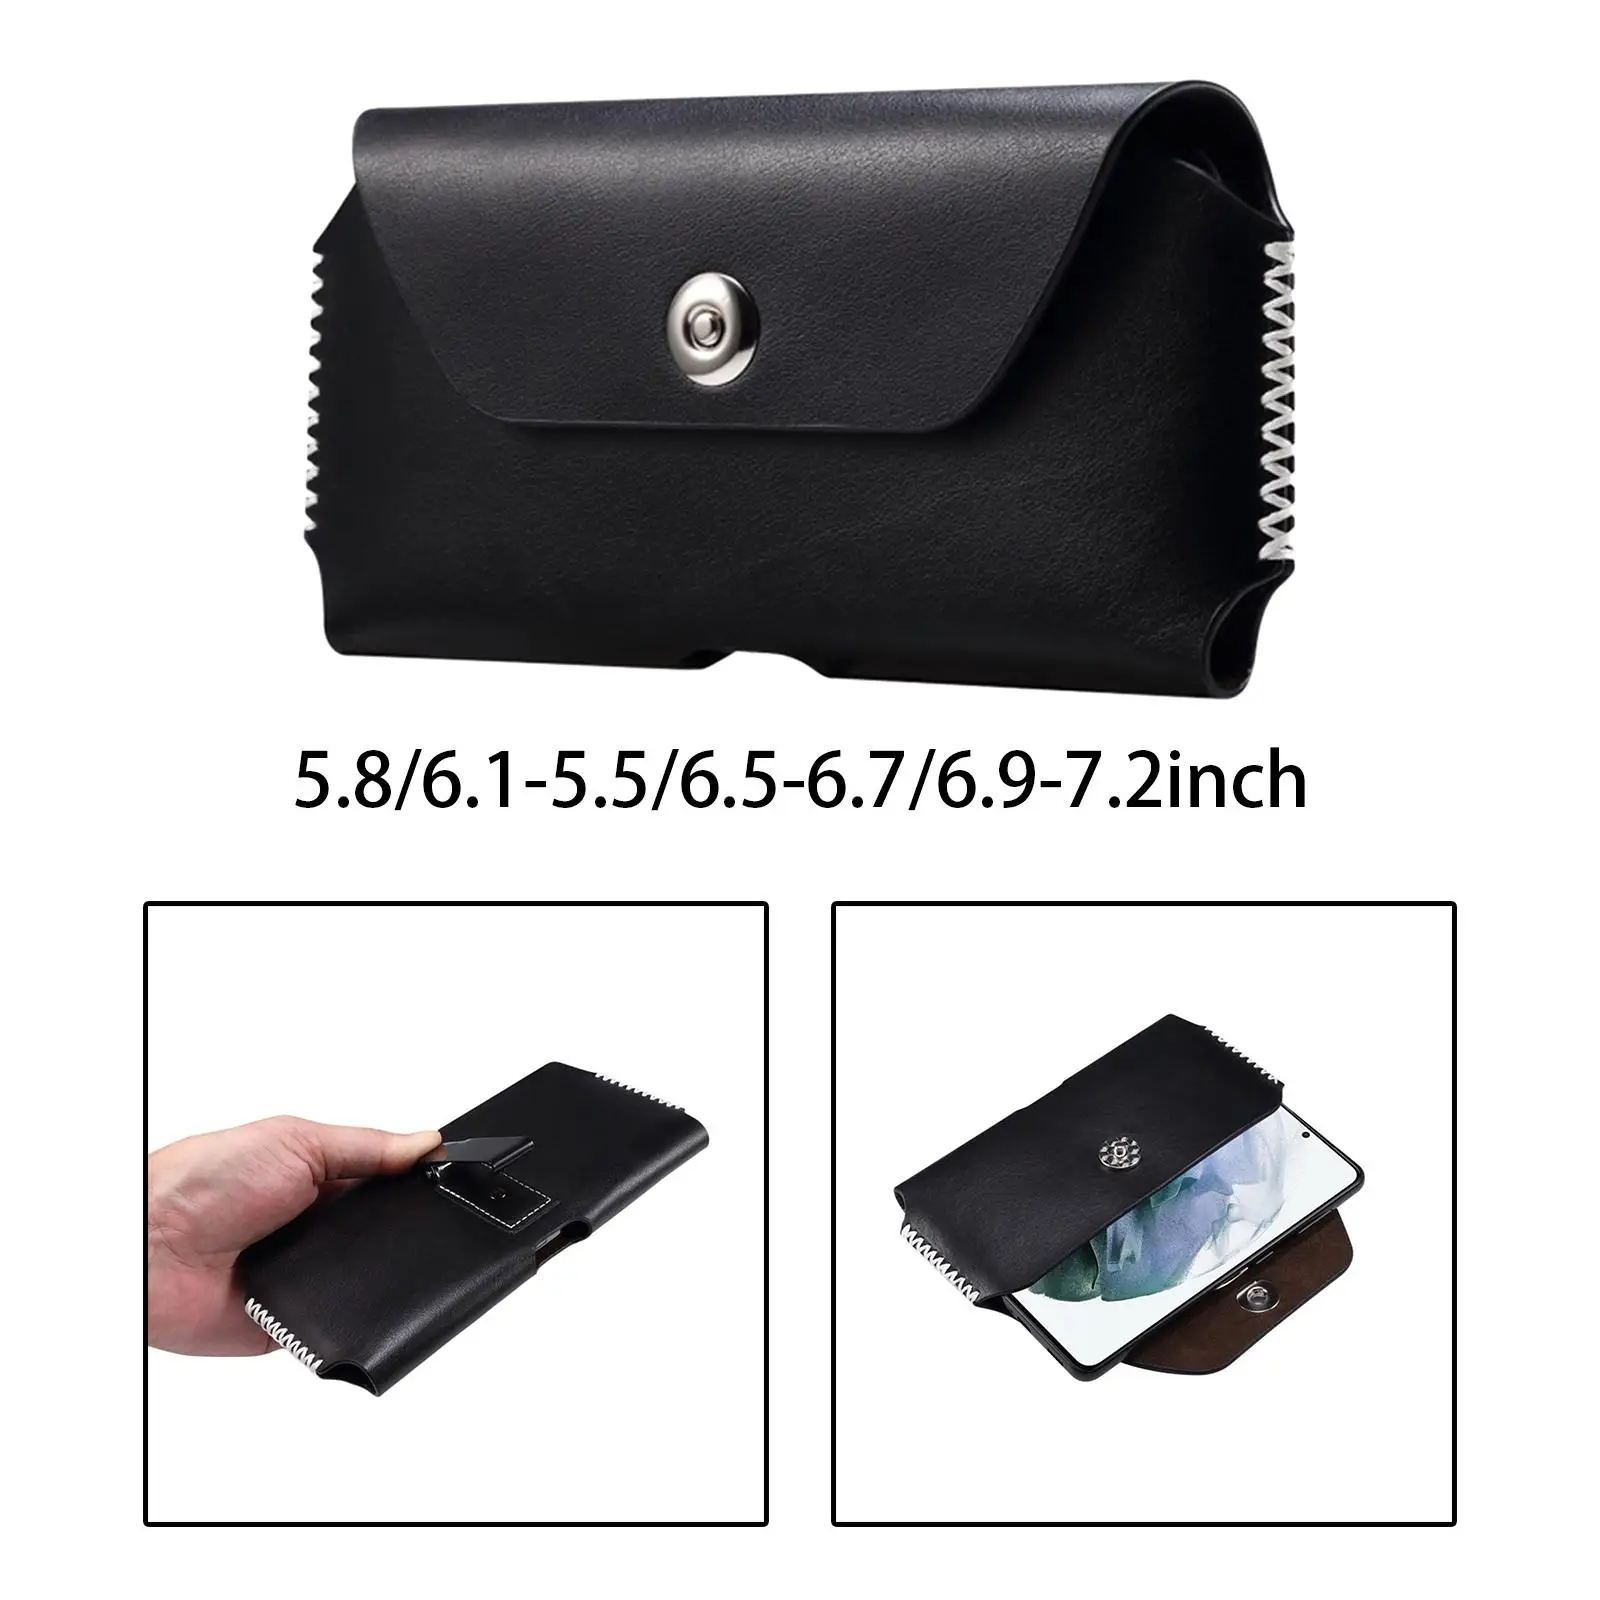 Universal PU Leather Belt Pouch for Phone with Belt Clip Waist Pack Soft Linings Belt Holster Wallet Father`s Day Gift Black